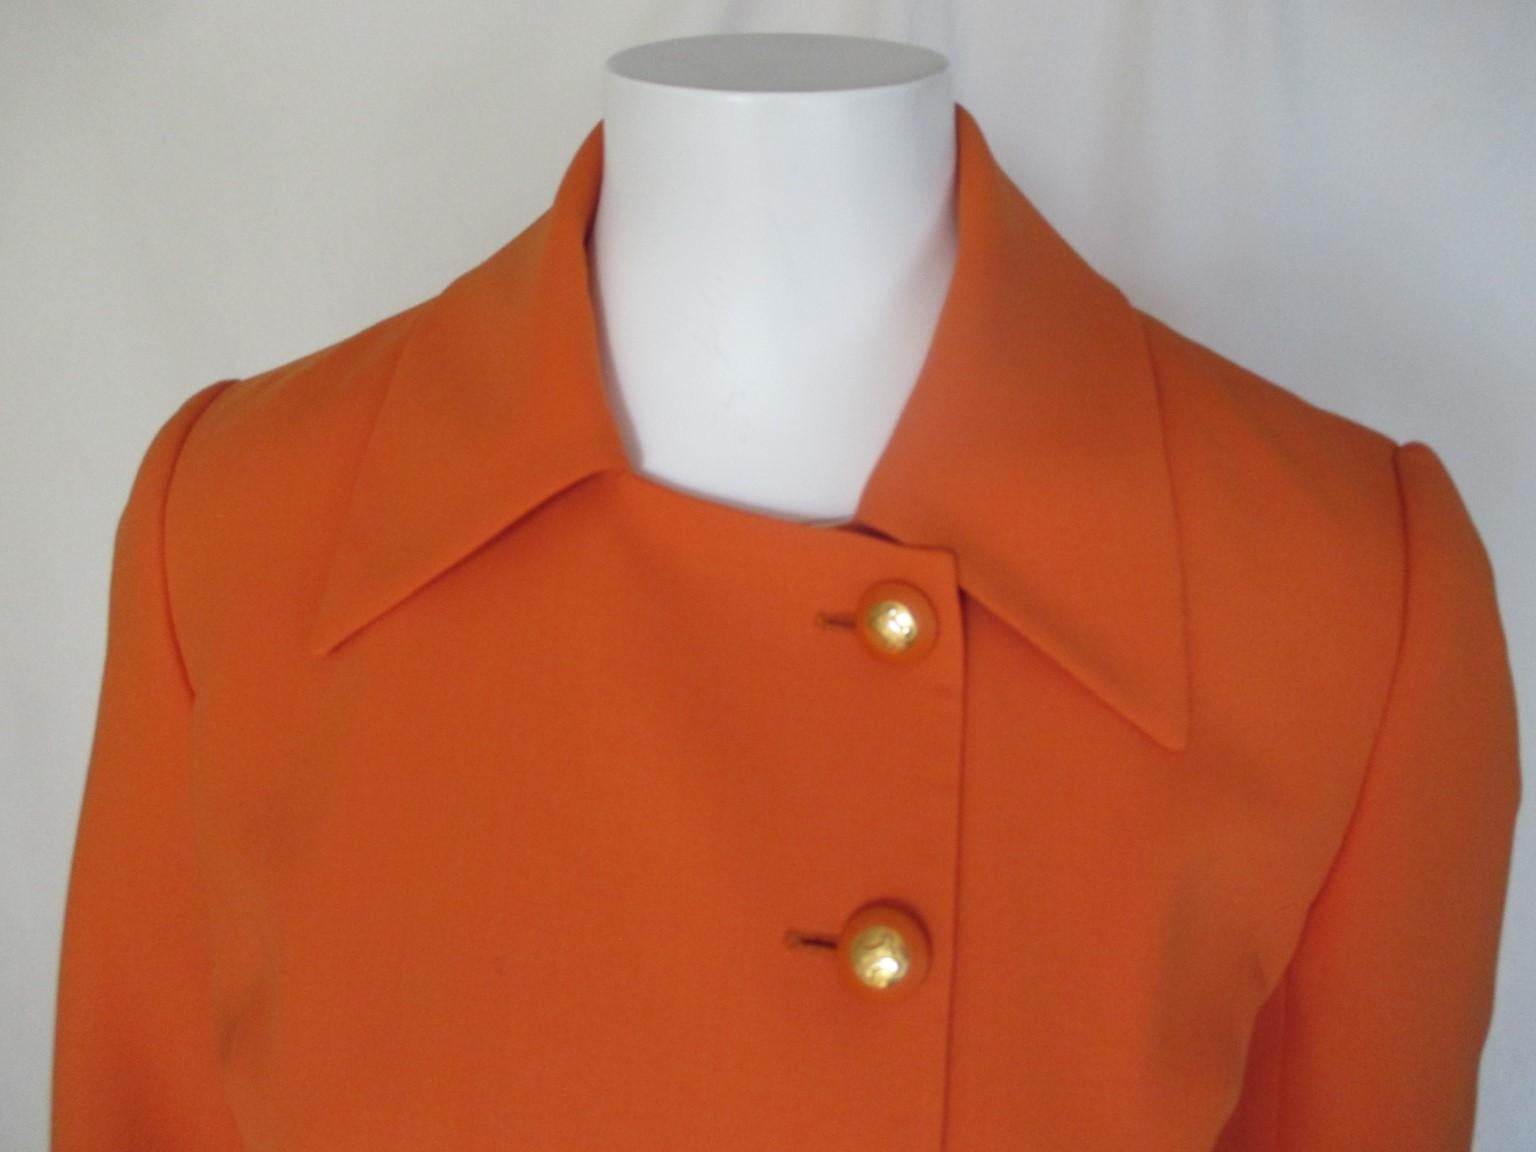 Orange vintage blazer from Celine Paris
with 2 pockets , 1 inside closing button and 6 gold tone Celine buttons.
Material: Light wool, Fully lined 
Appears to be small, please refer to the measurements in the description.

Pre-owned condition with